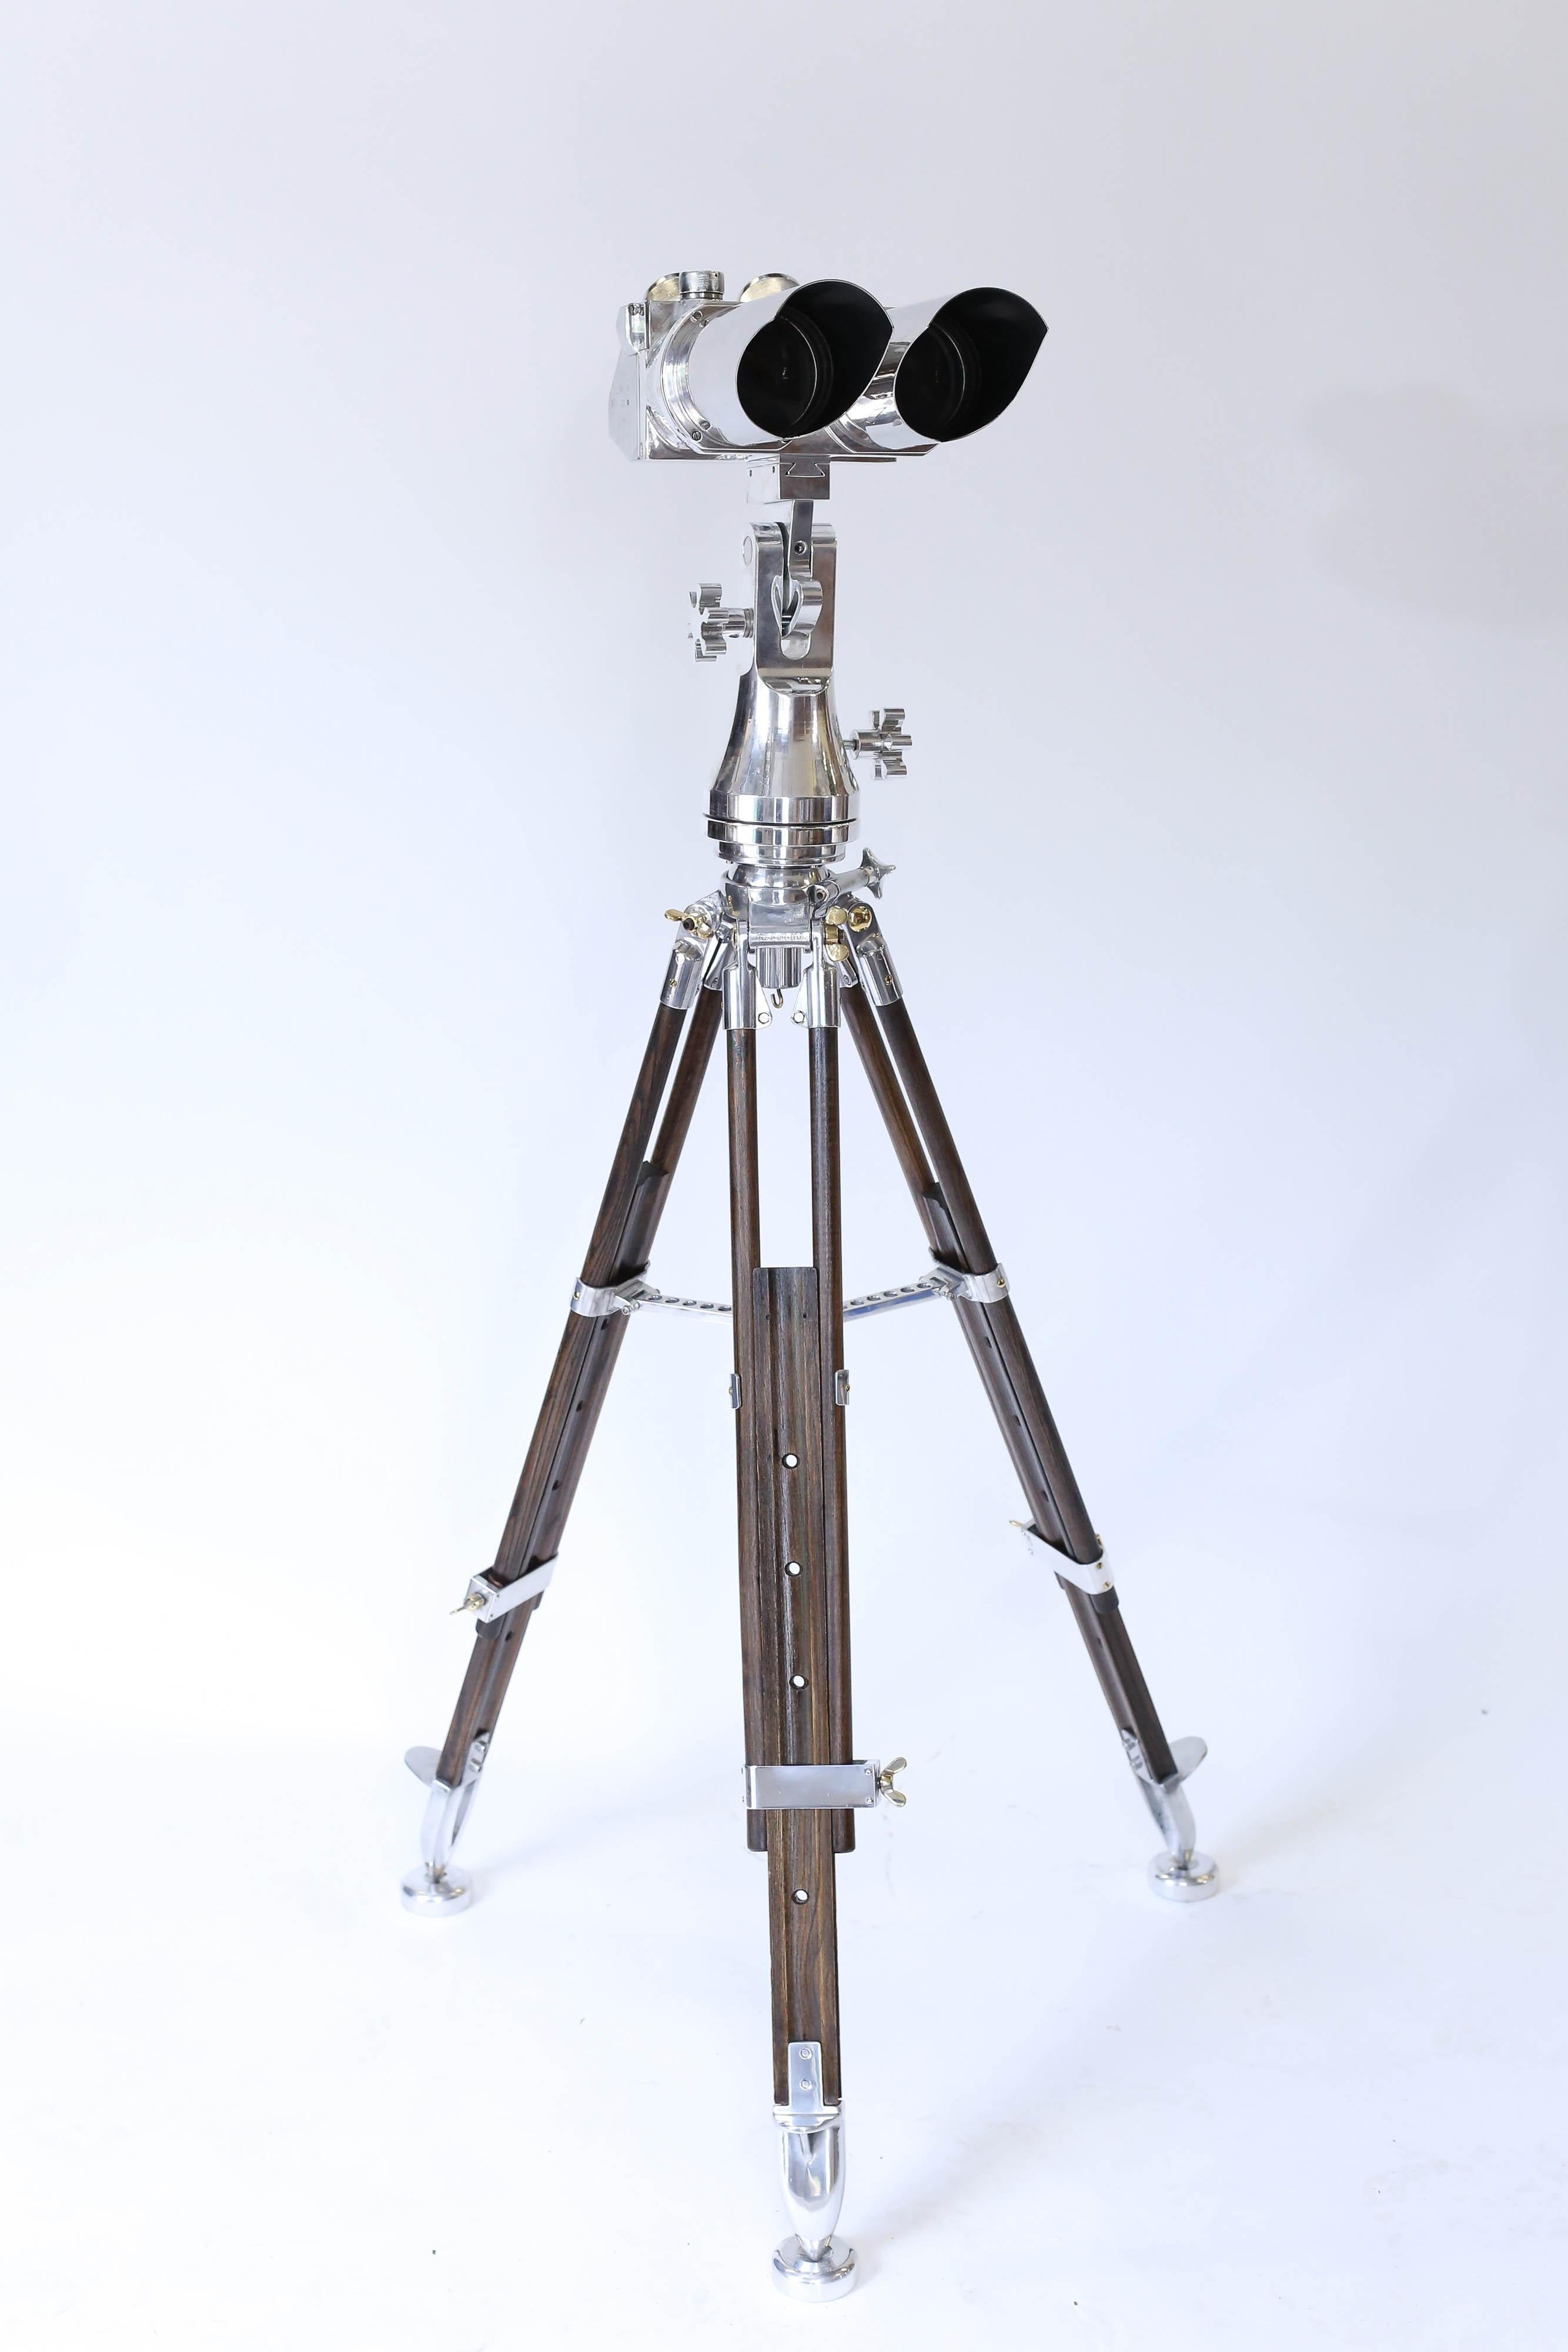 Fabulous Emil Busch German binoculars on a telescopic stand. Marked DF (Doppelfernrohr - Double Telescope) 10 x 80, CXN (3 letter wartime German coding for Emil Busch) 75494 ( serial number). These binoculars were originally produced for the German